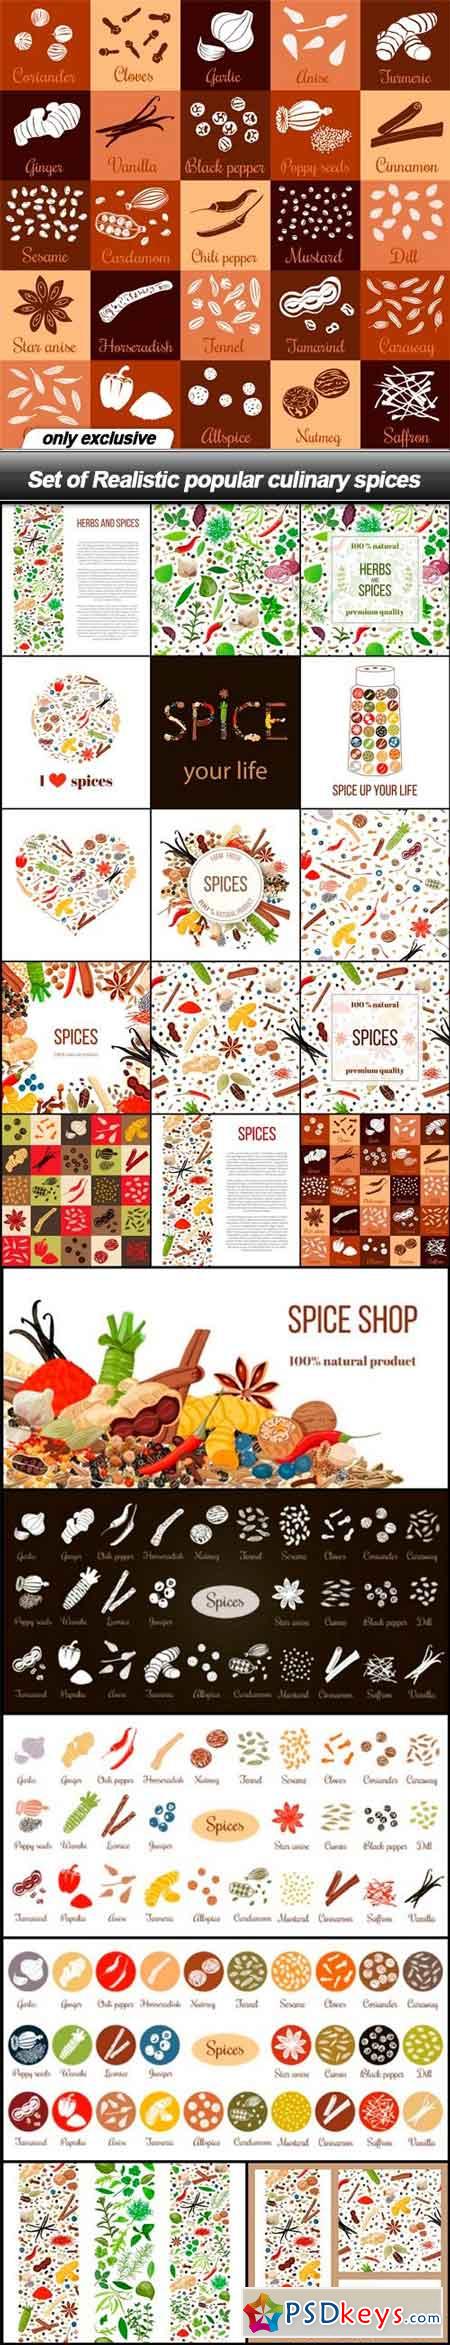 Set of Realistic popular culinary spices - 21 EPS